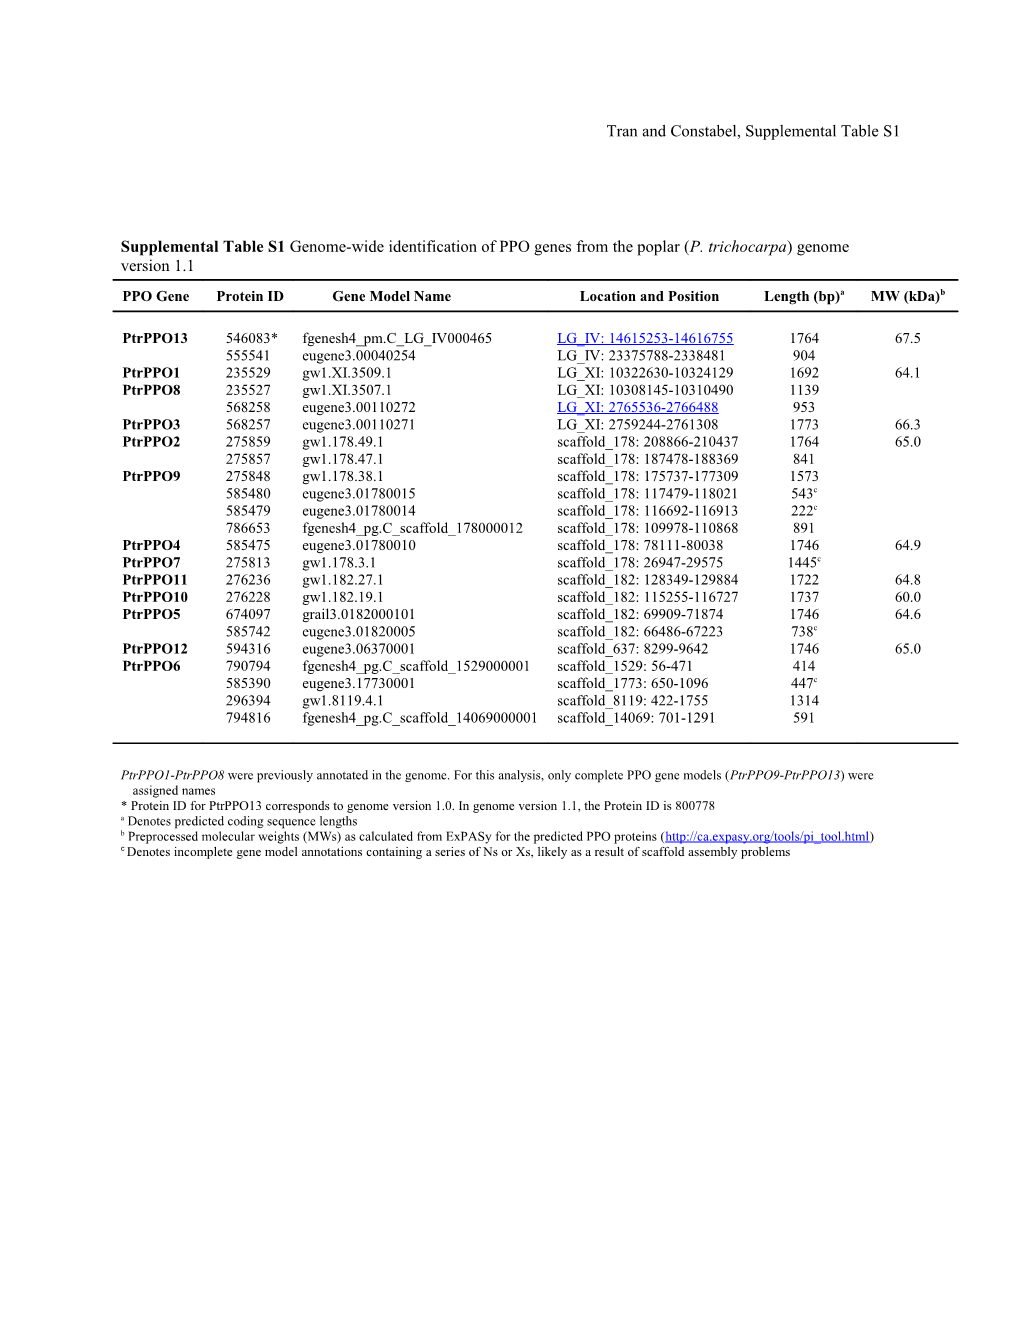 Table 1 Percent Identity of Poplar PPO Nucleotide (Italicized) and Protein Sequences